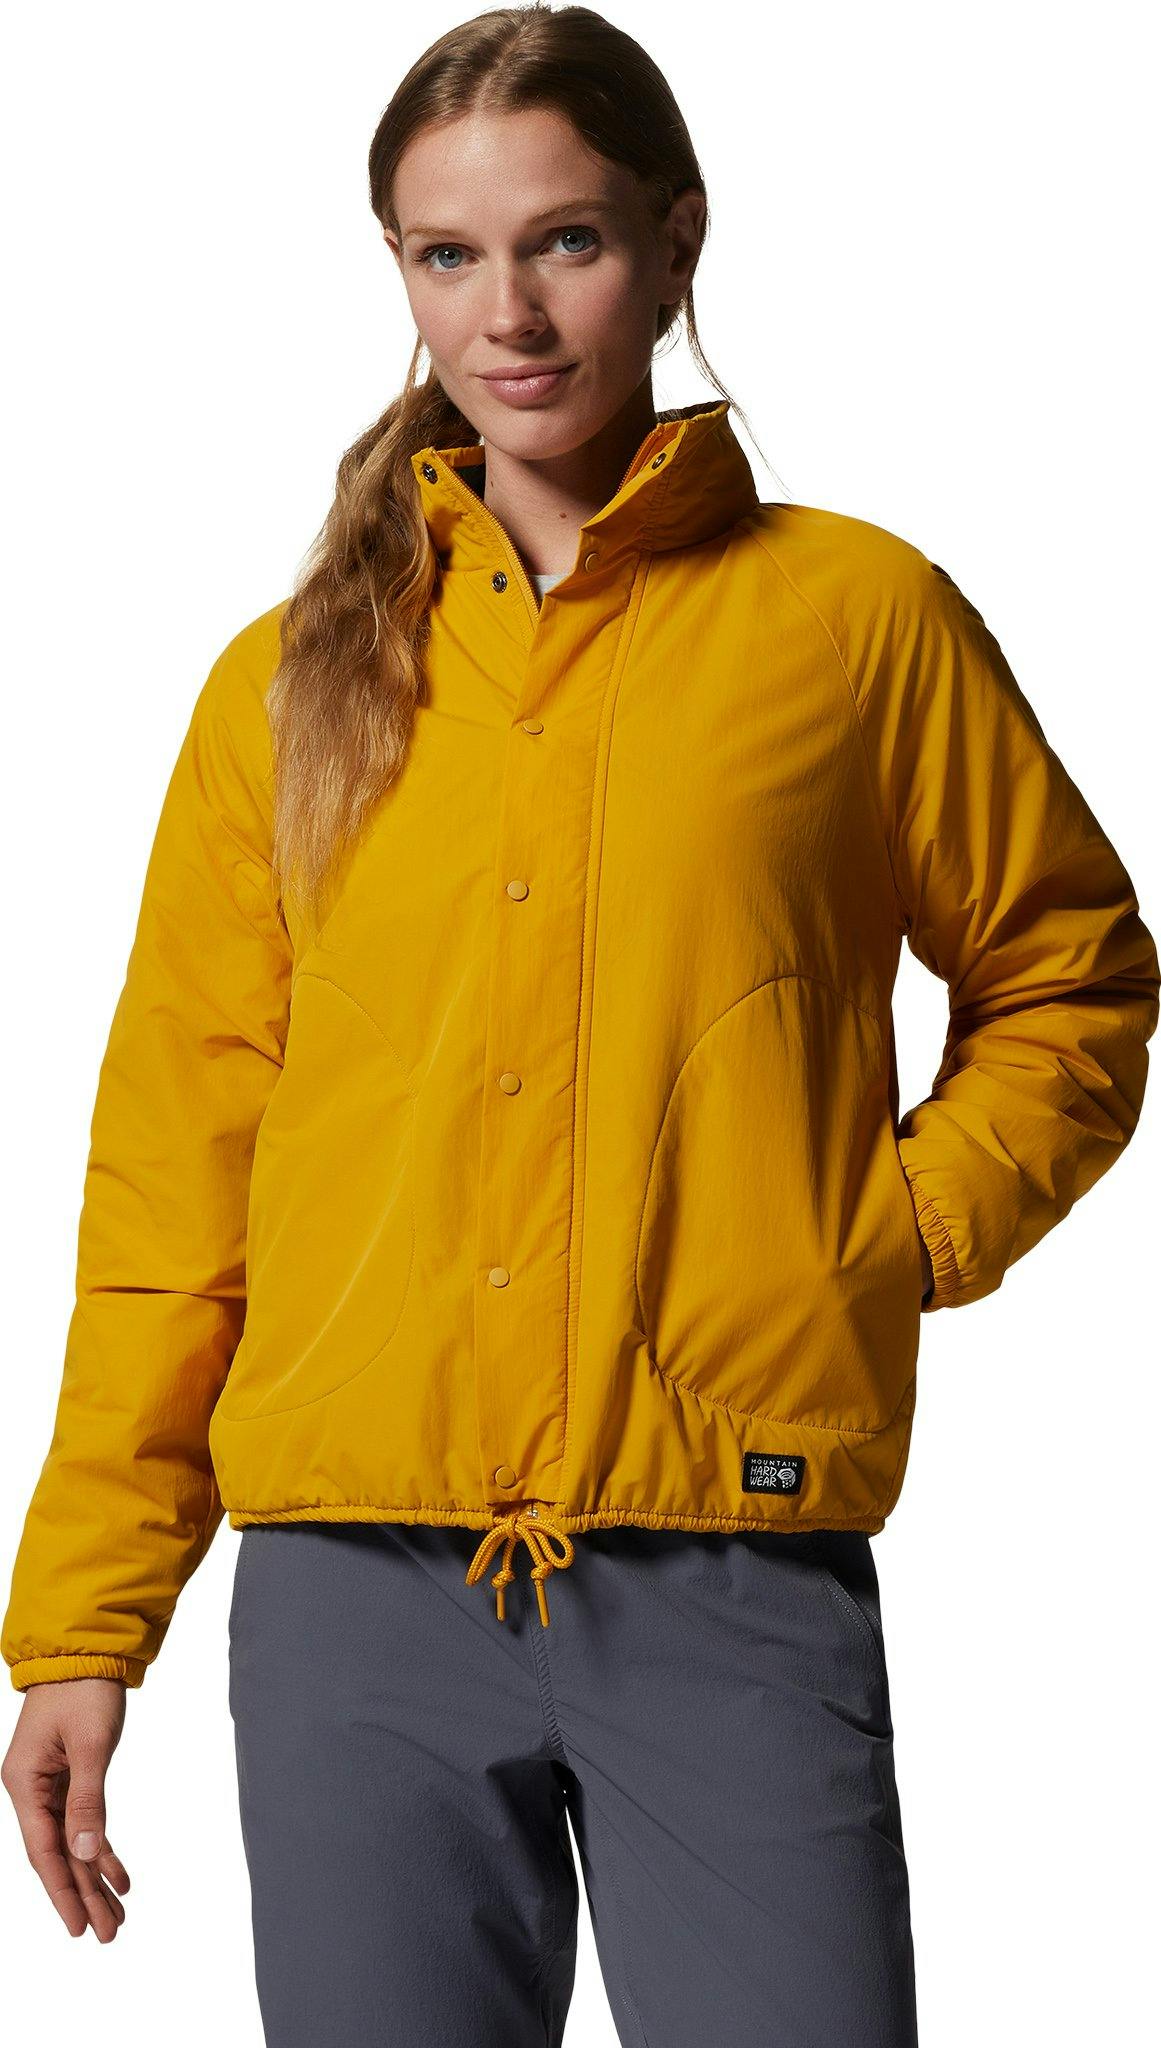 Product image for HiCamp Jacket - Women's